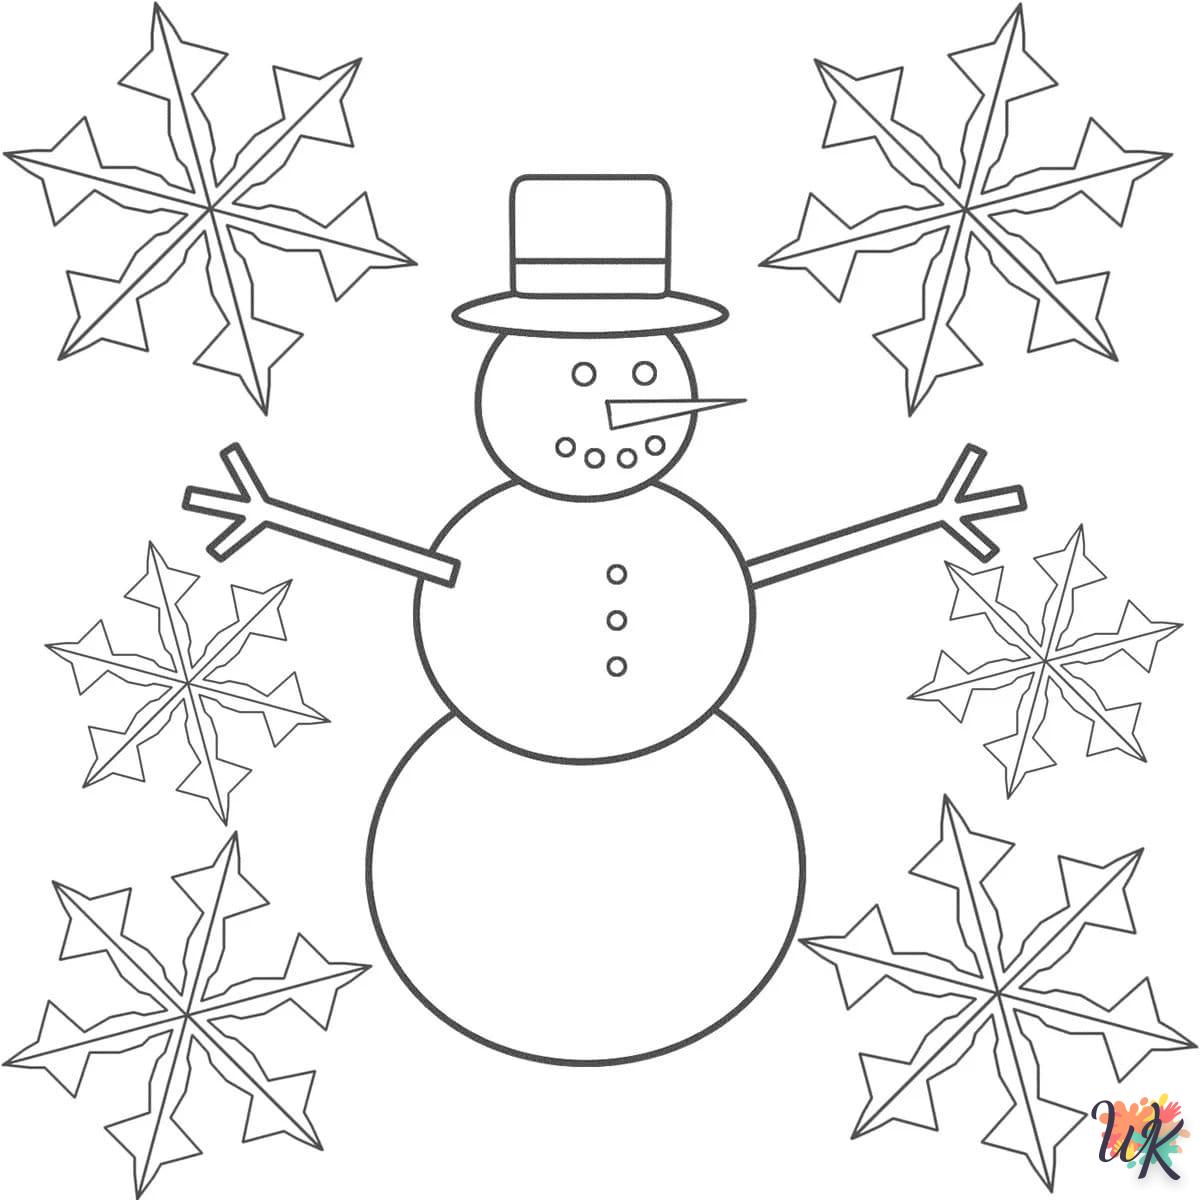 Snowman coloring page to print a4